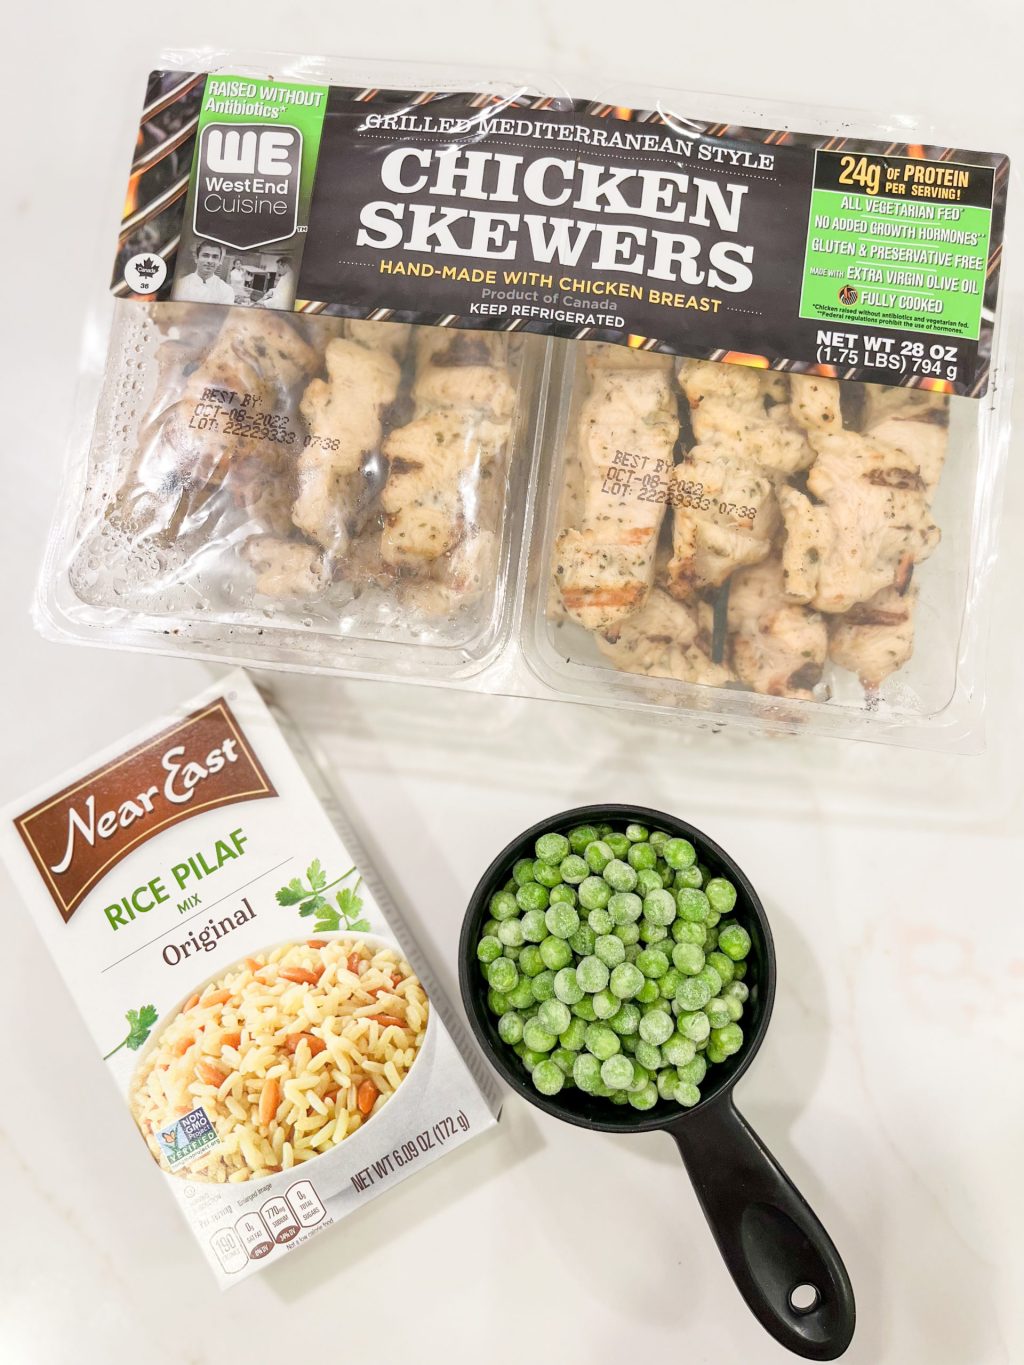 5 Easy Meals with Costco Mediterranean Grilled Chicken Strips